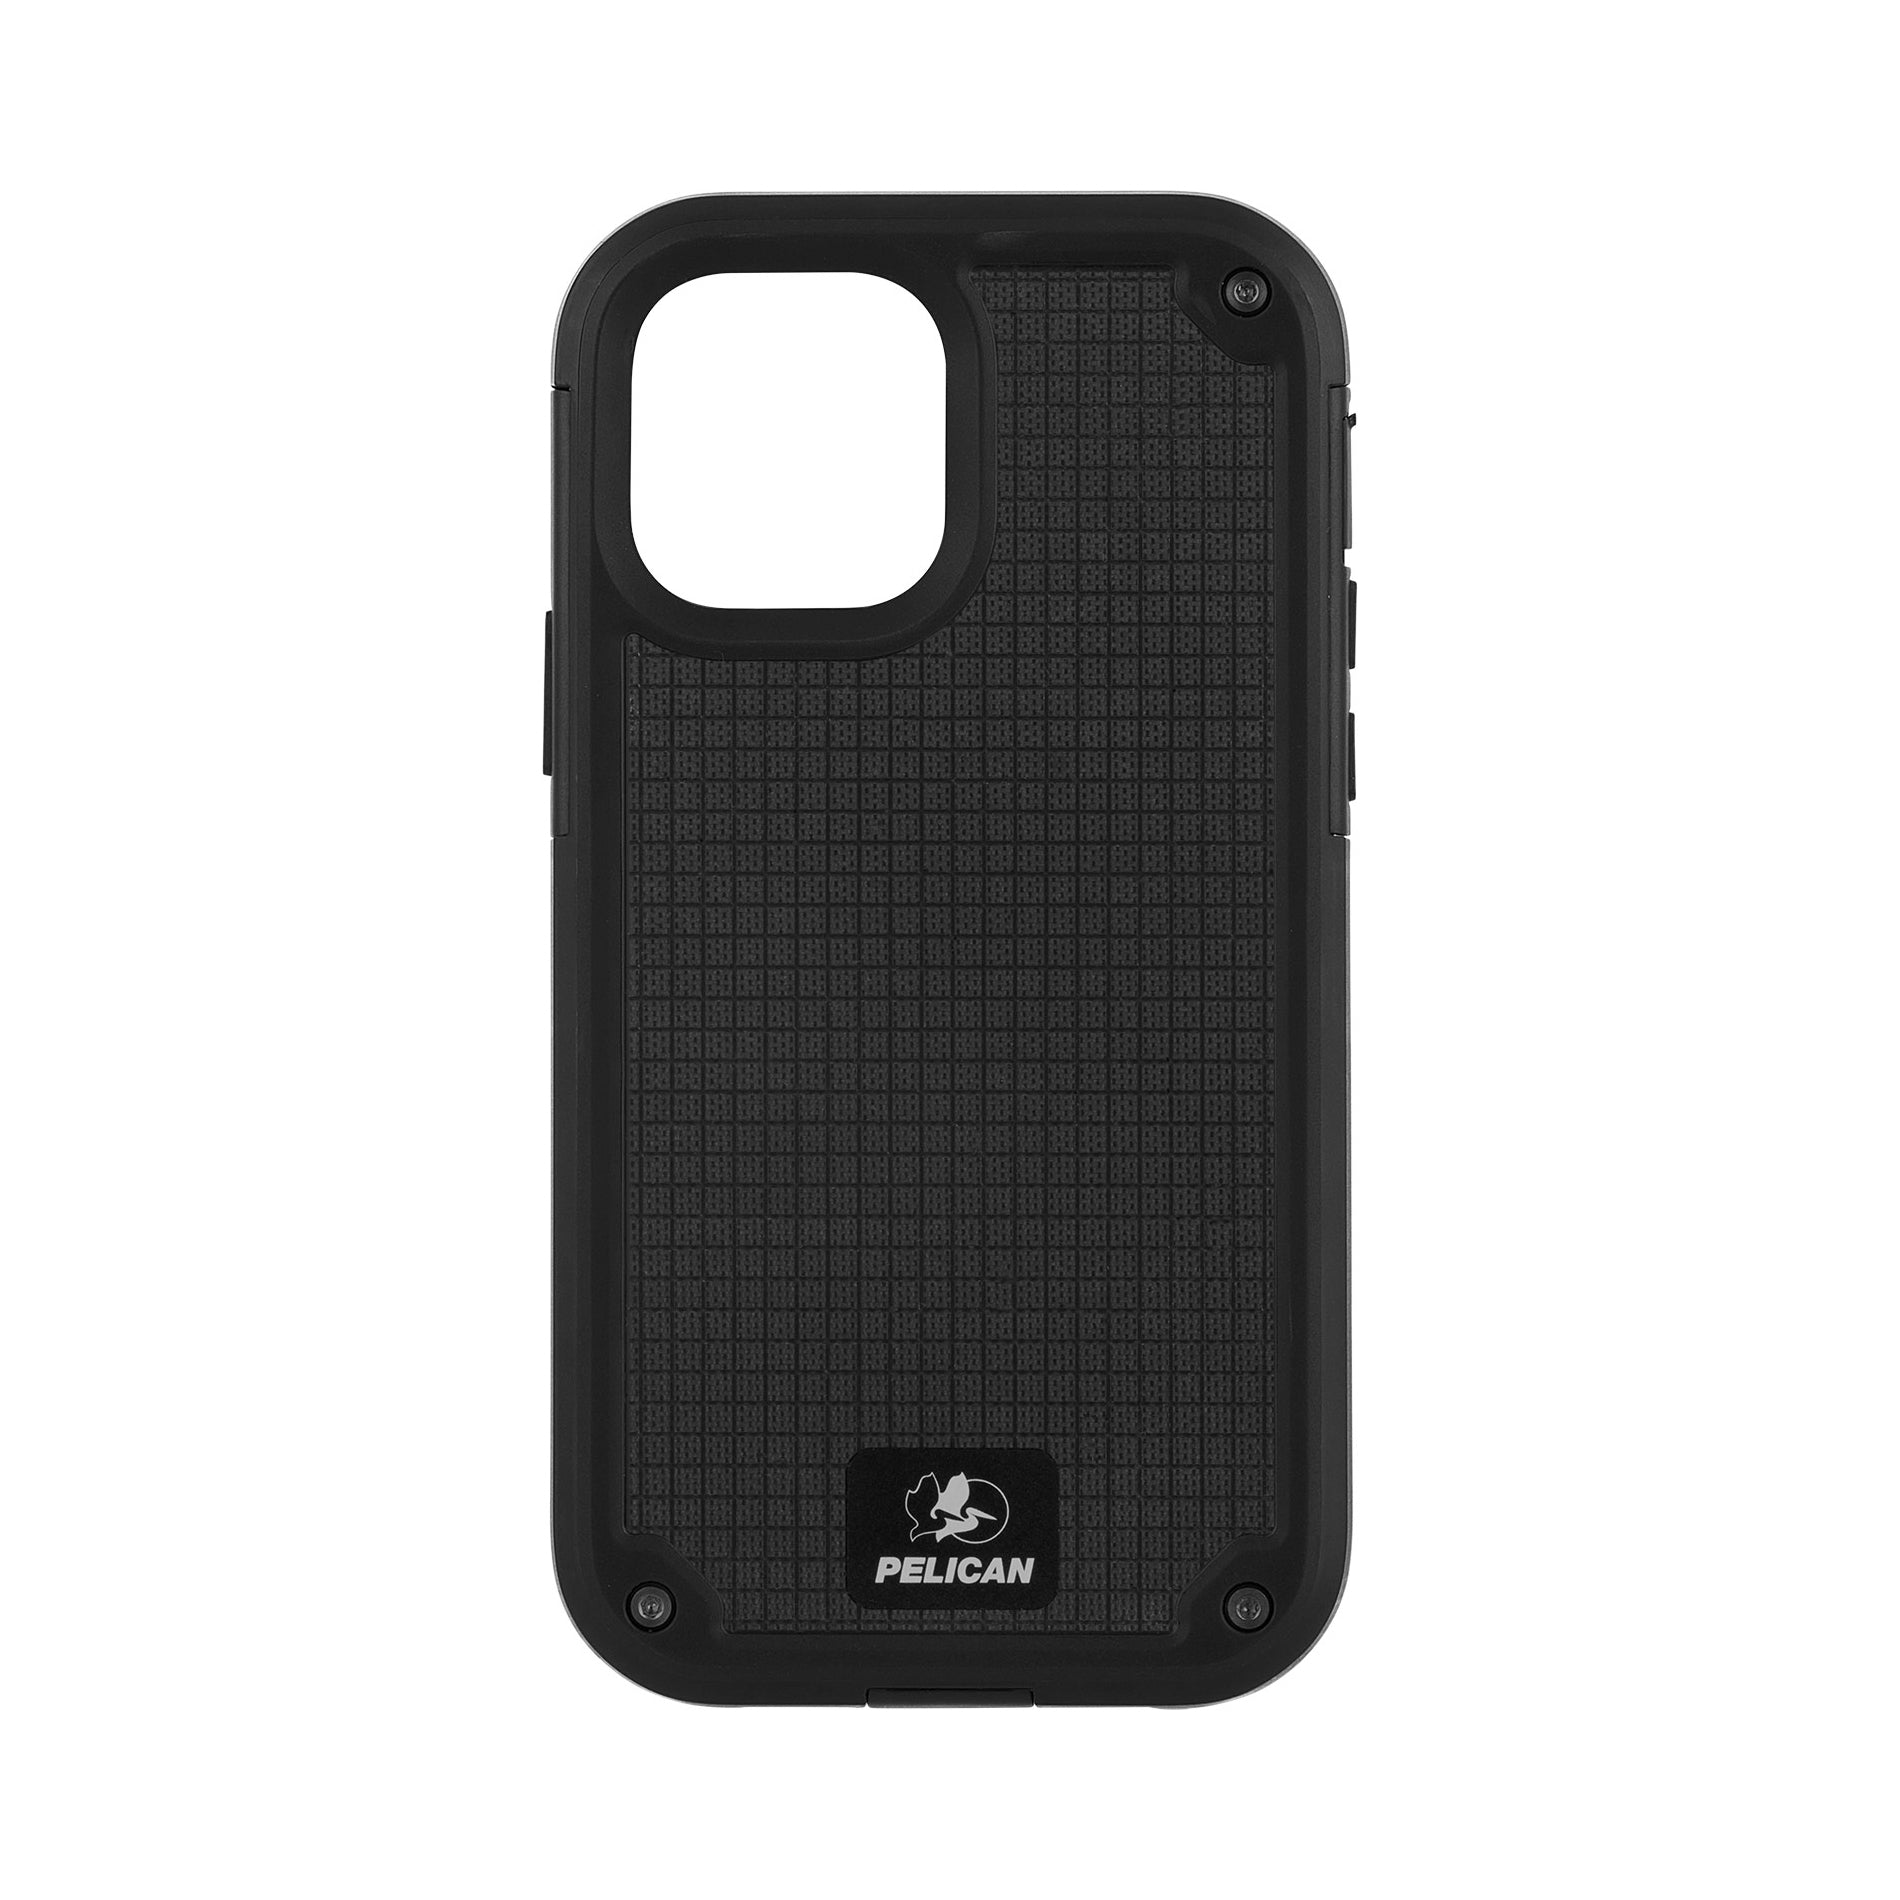 Pelican Shield G10 Ultra Protective Case + Holster For iPhone iPhone 12 mini - Mac Addict